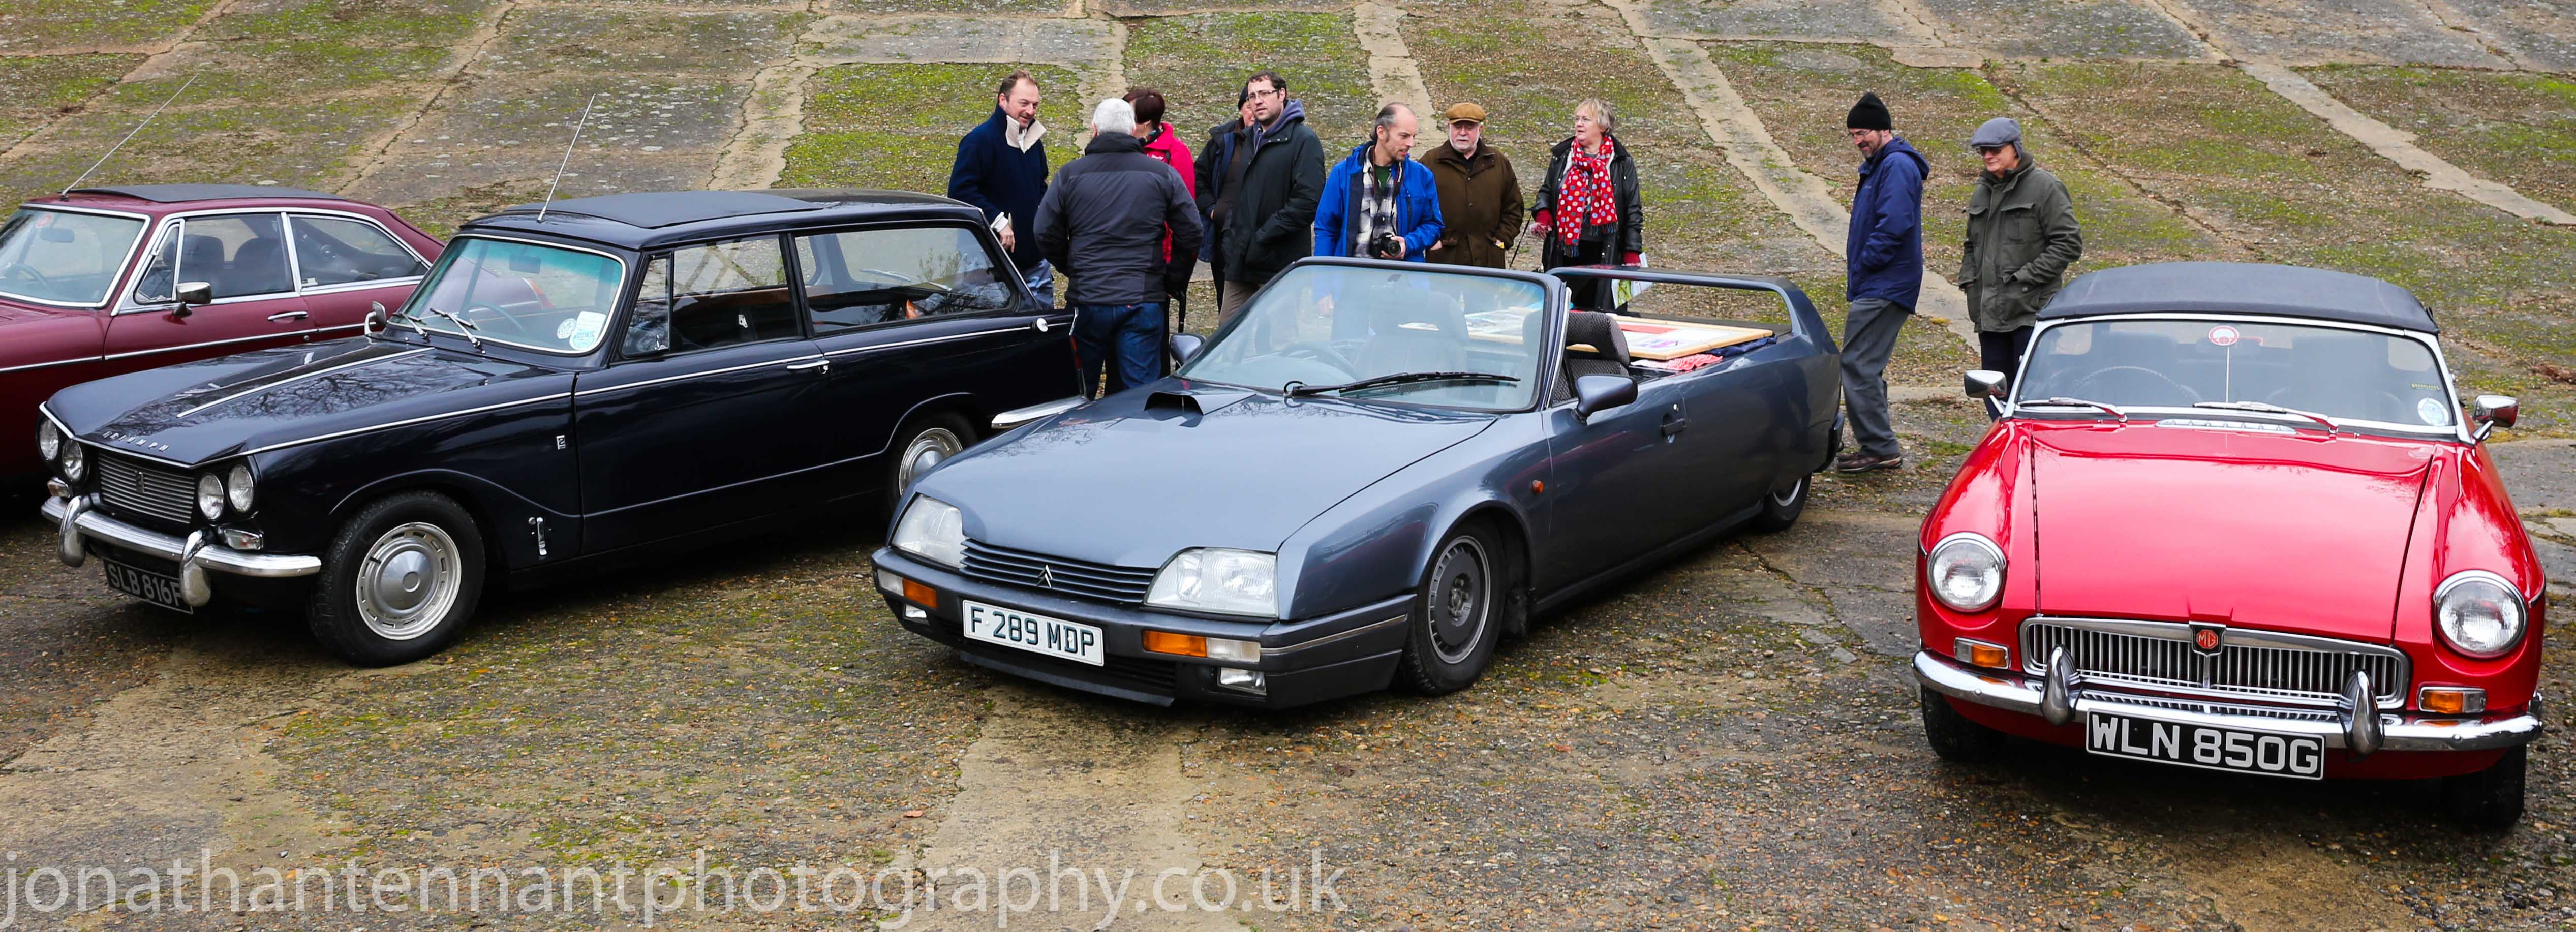 Brooklands News Year meet - Page 1 - Events/Meetings/Travel - PistonHeads